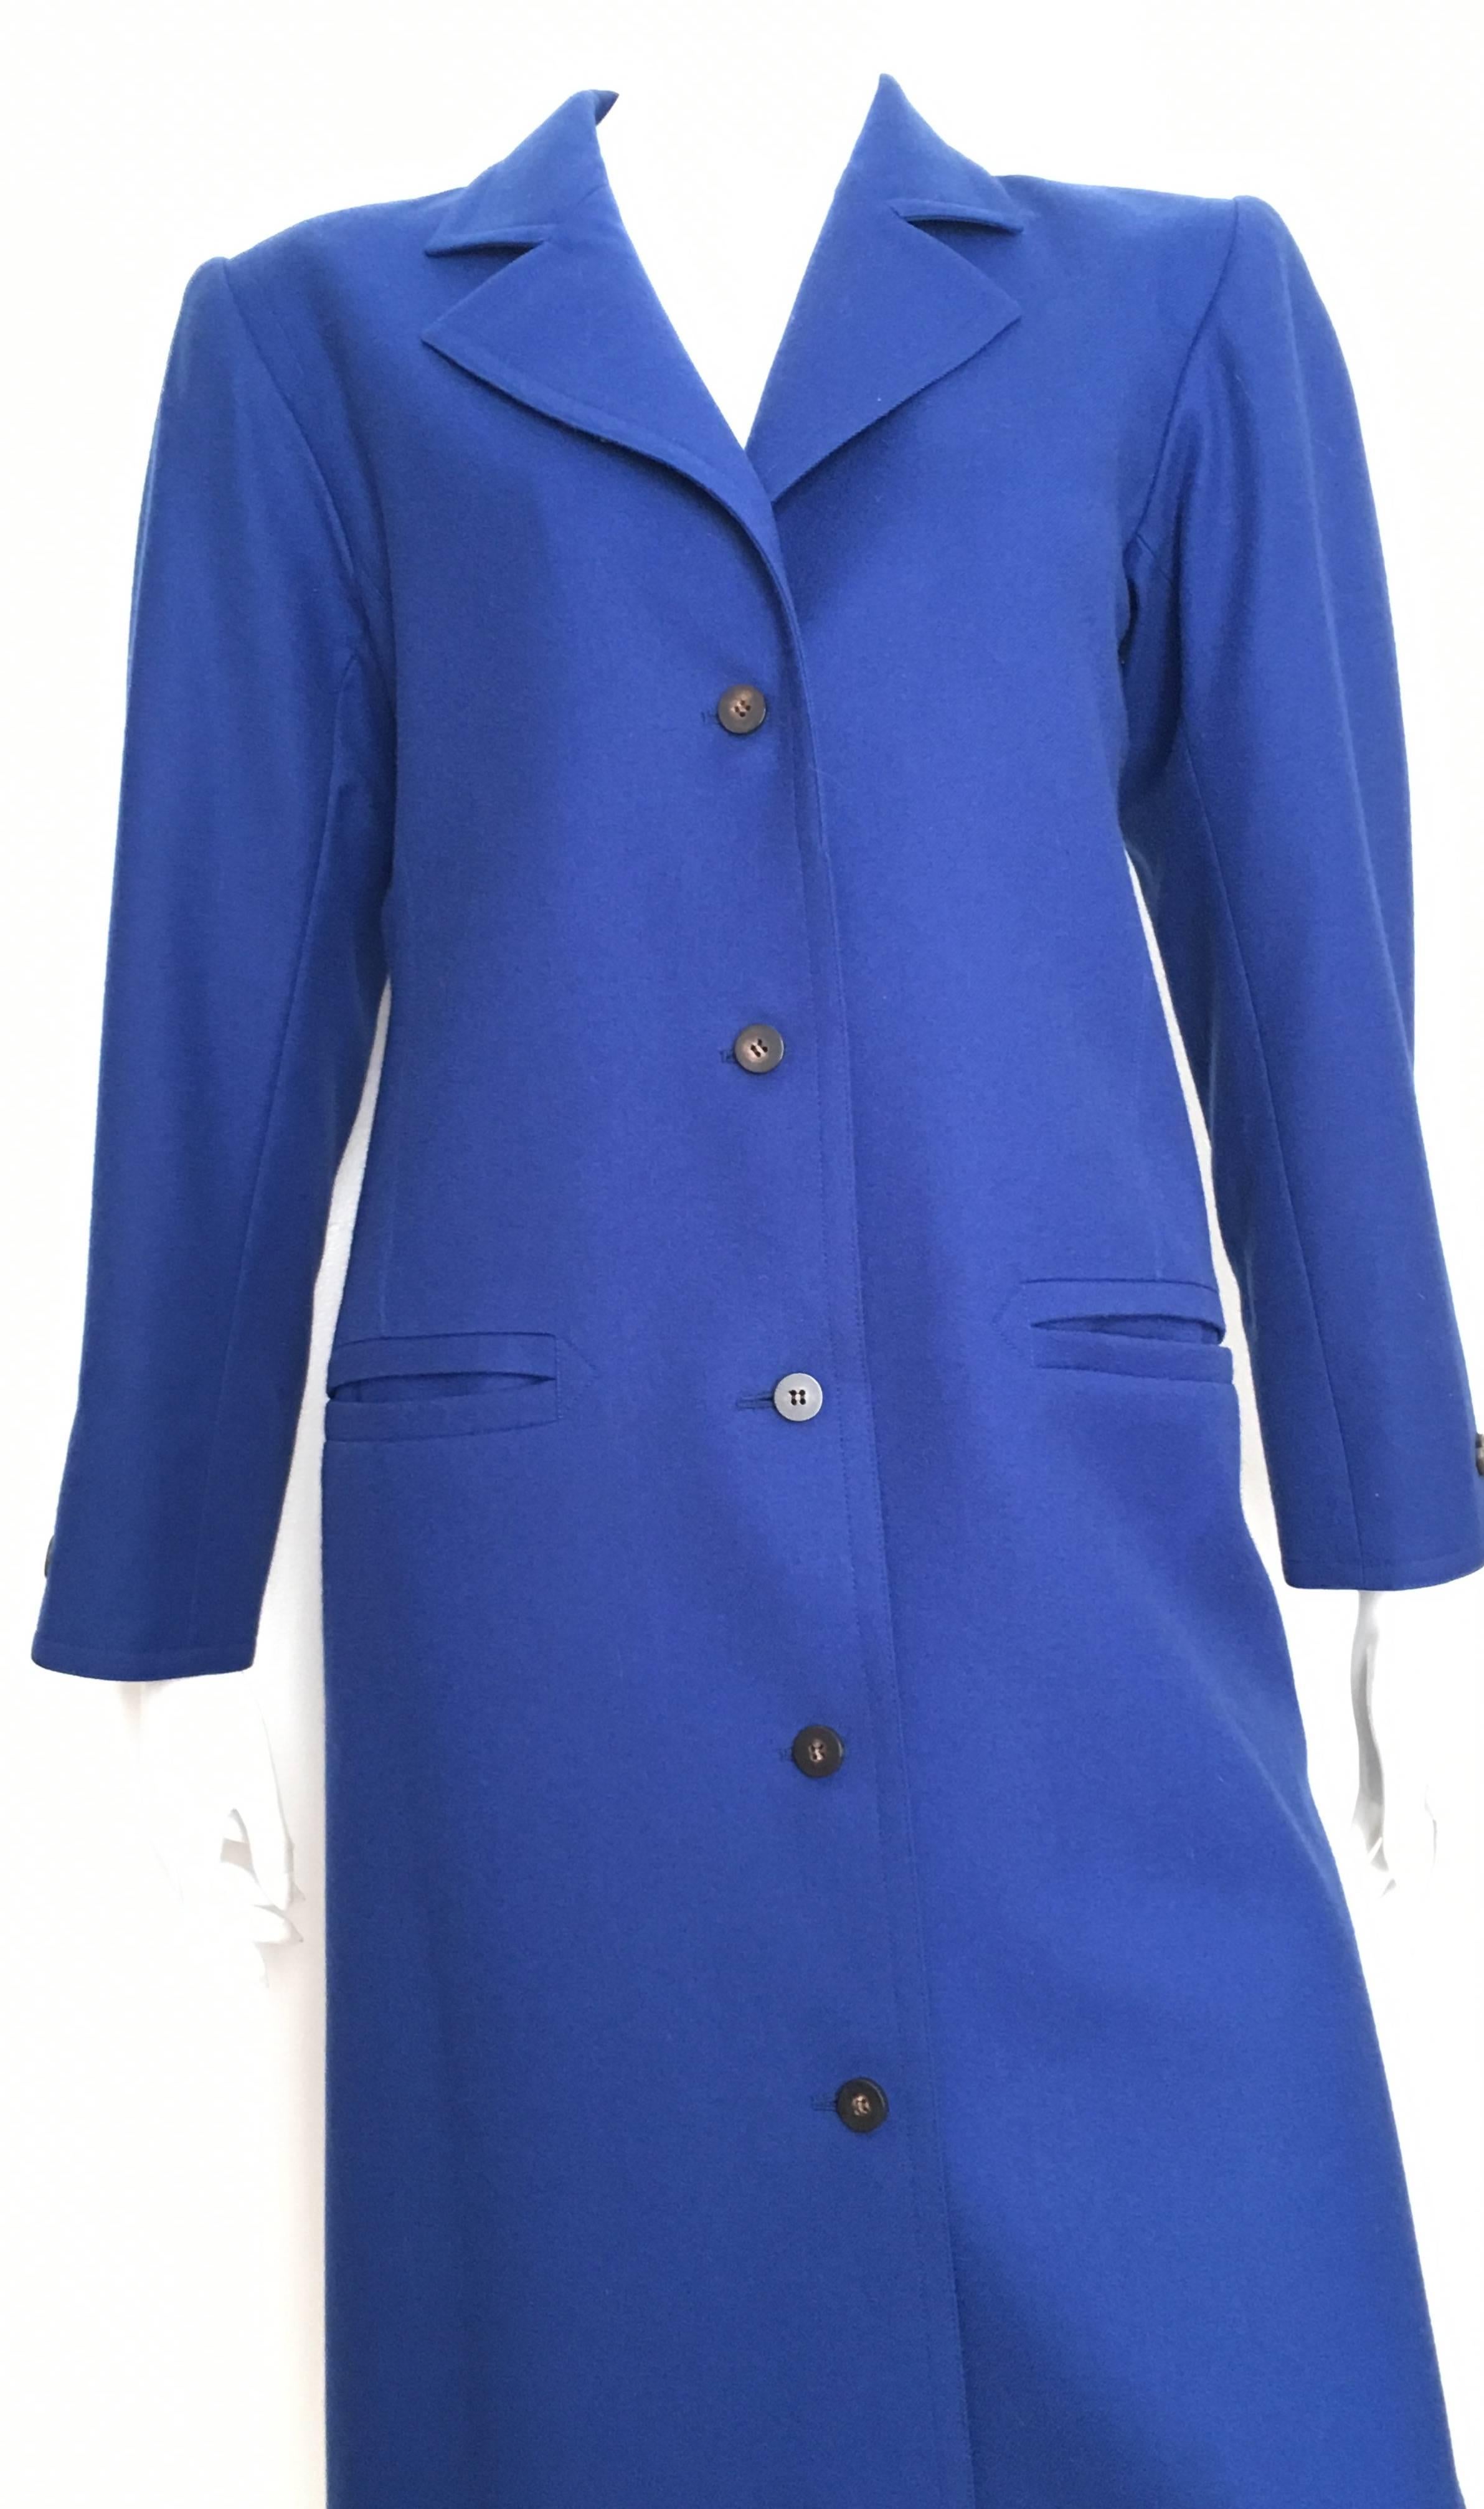 Yves Saint Laurent 1980s Yves Klein Blue wool coat is a size 8.  Ladies please pull out your trusted measuring tape so you can properly measure your bust, waist, hips & sleeves to make certain this will fit the way Laurent wanted it to.  This